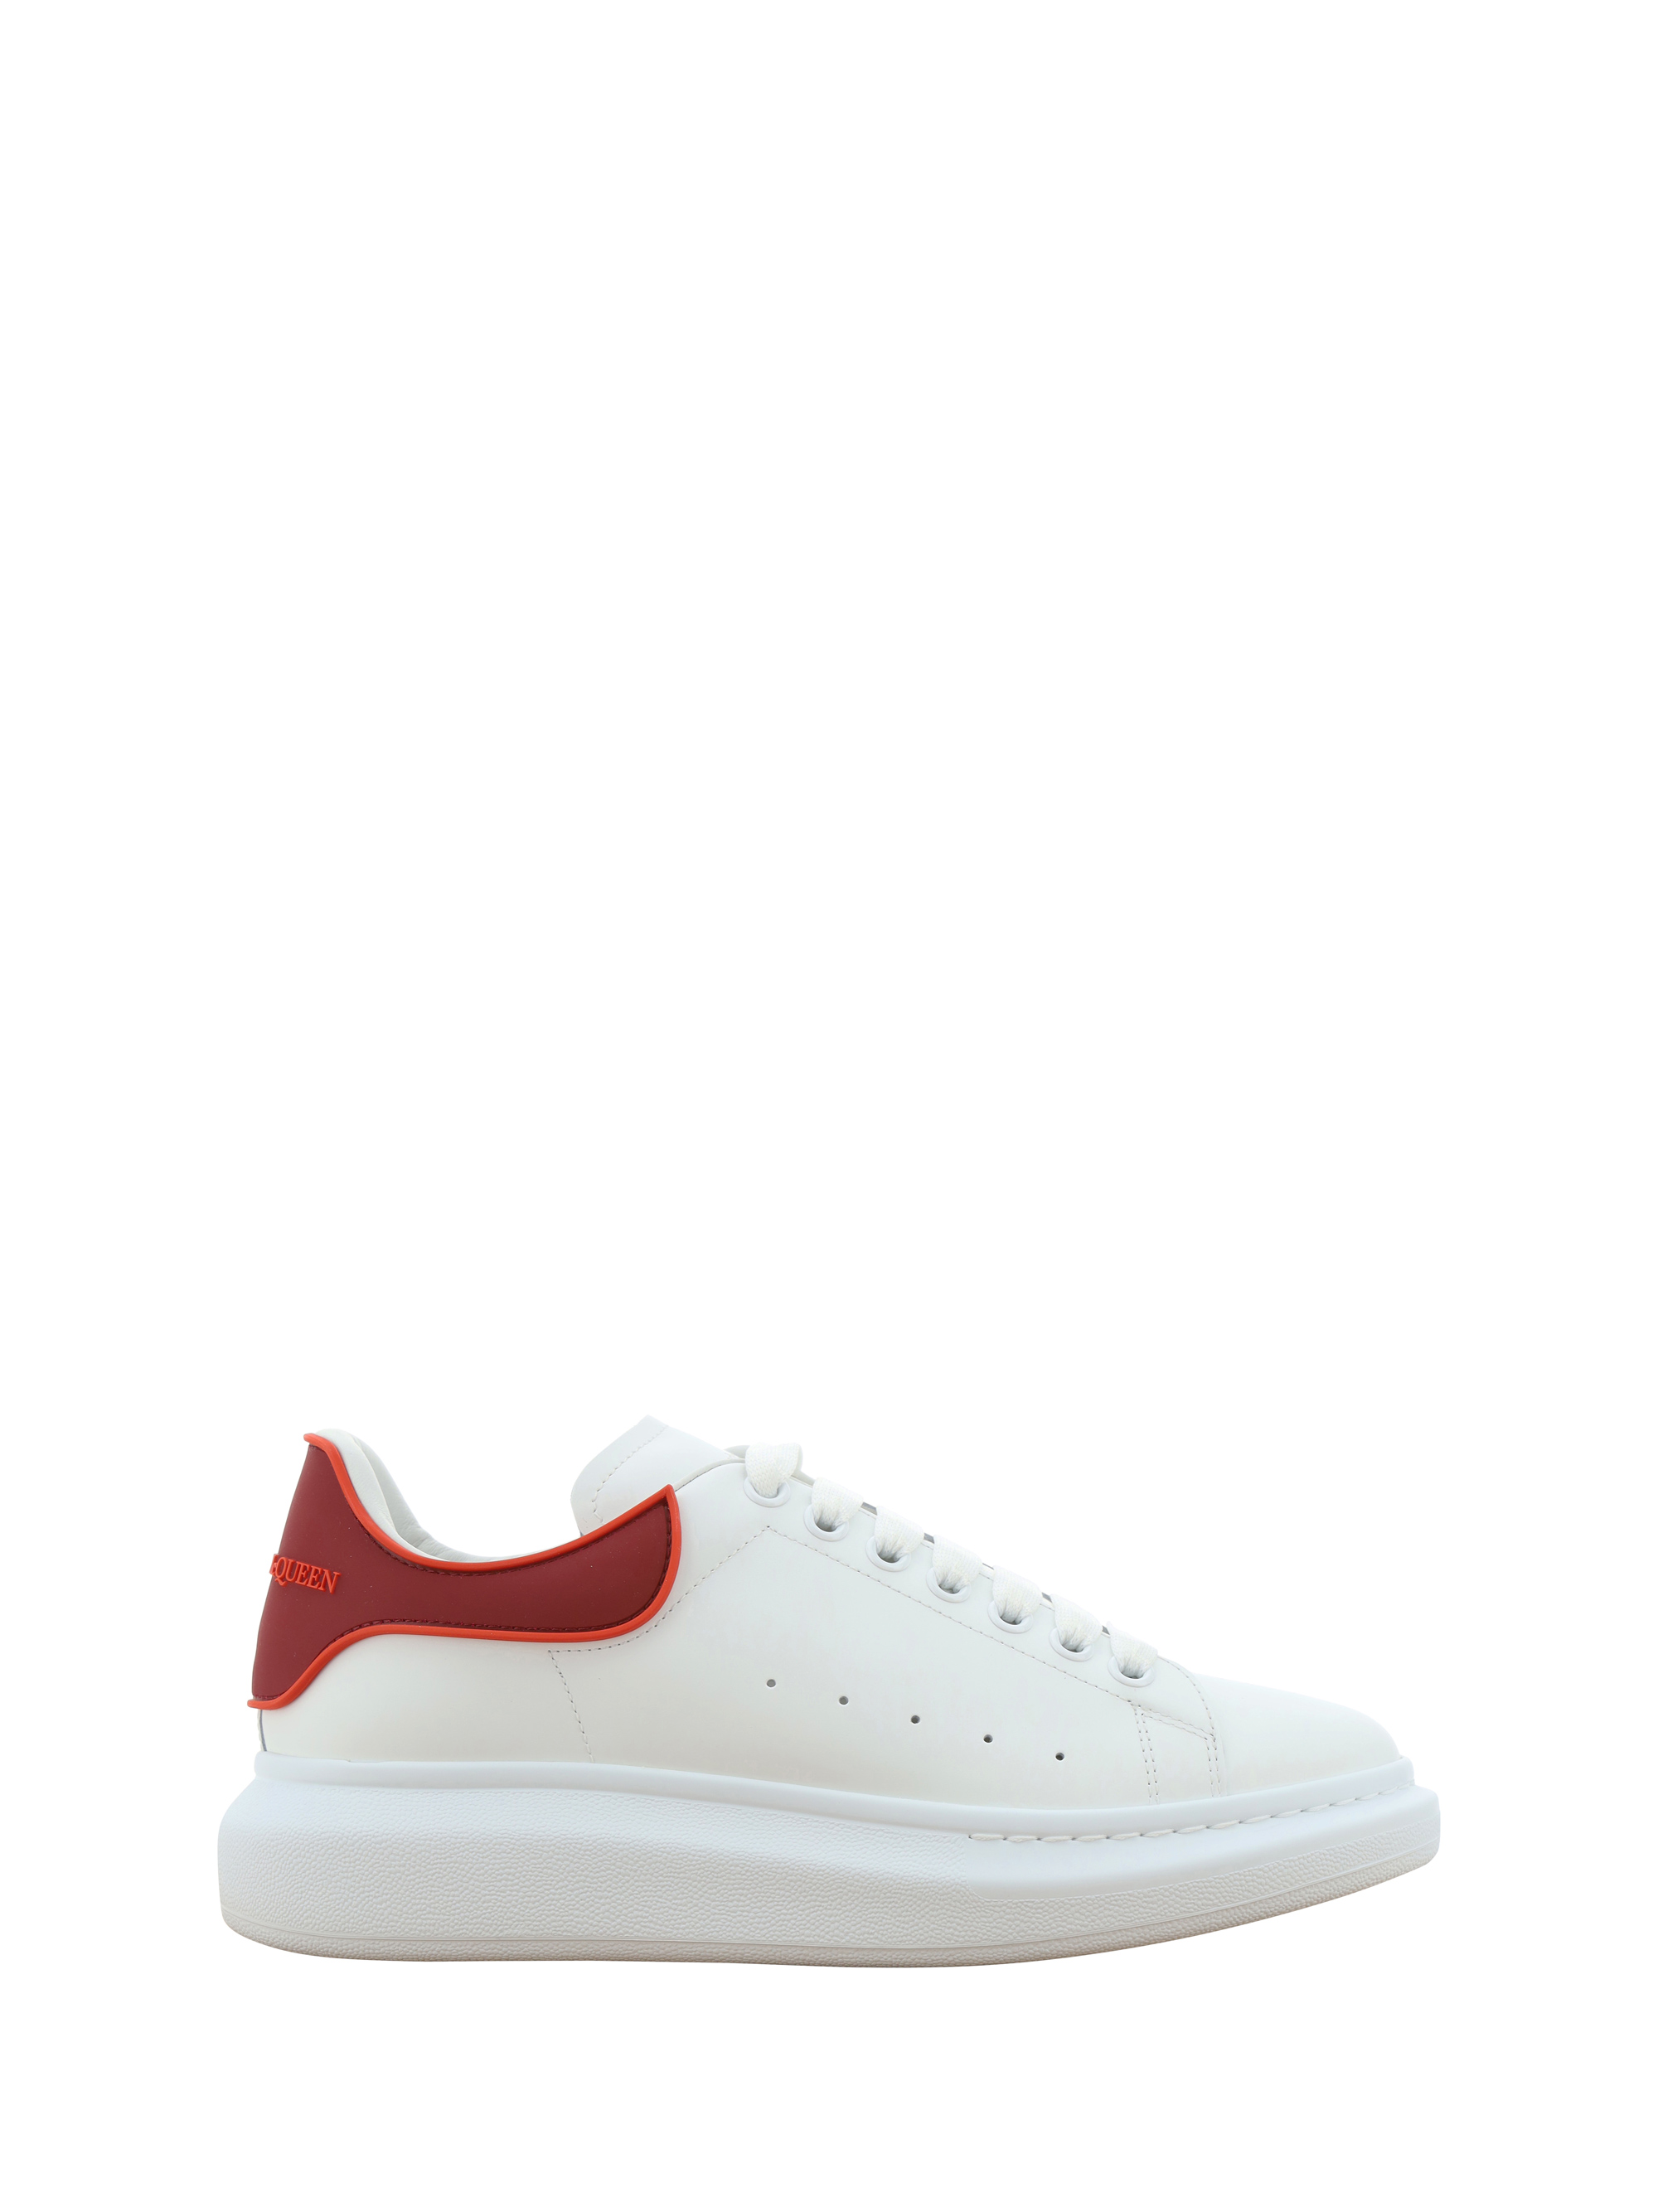 Alexander Mcqueen Sneakers In White/ro.red/sca Red